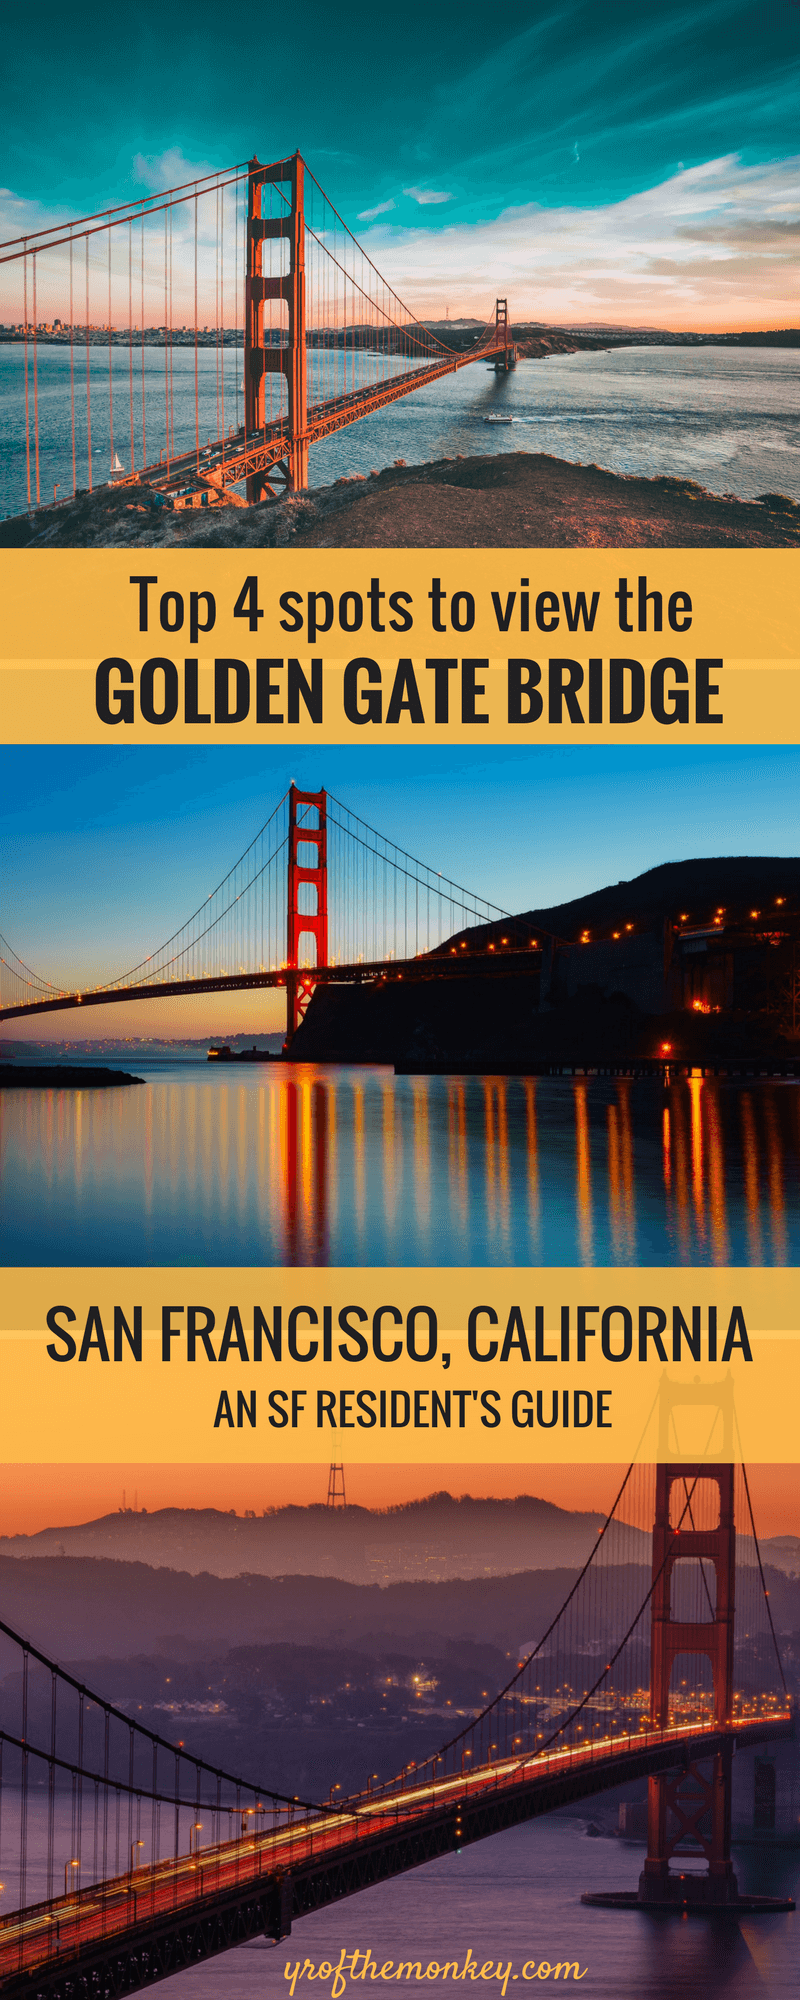 Where can you find the best views of the Golden Gate Bridge, San Francisco, California, USA? This local's guide tells you the BEST four spots to get the most sweeping views of the iconic Golden Gate bridge from in and around San Francisco, Bay Area. Read this insider guide to know the local's secret spots and pin it to your California travel board now! A must read for photographers! #bayarea #californiatravel #california #sanfrancisco #USA #goldengatebridge #northamerica